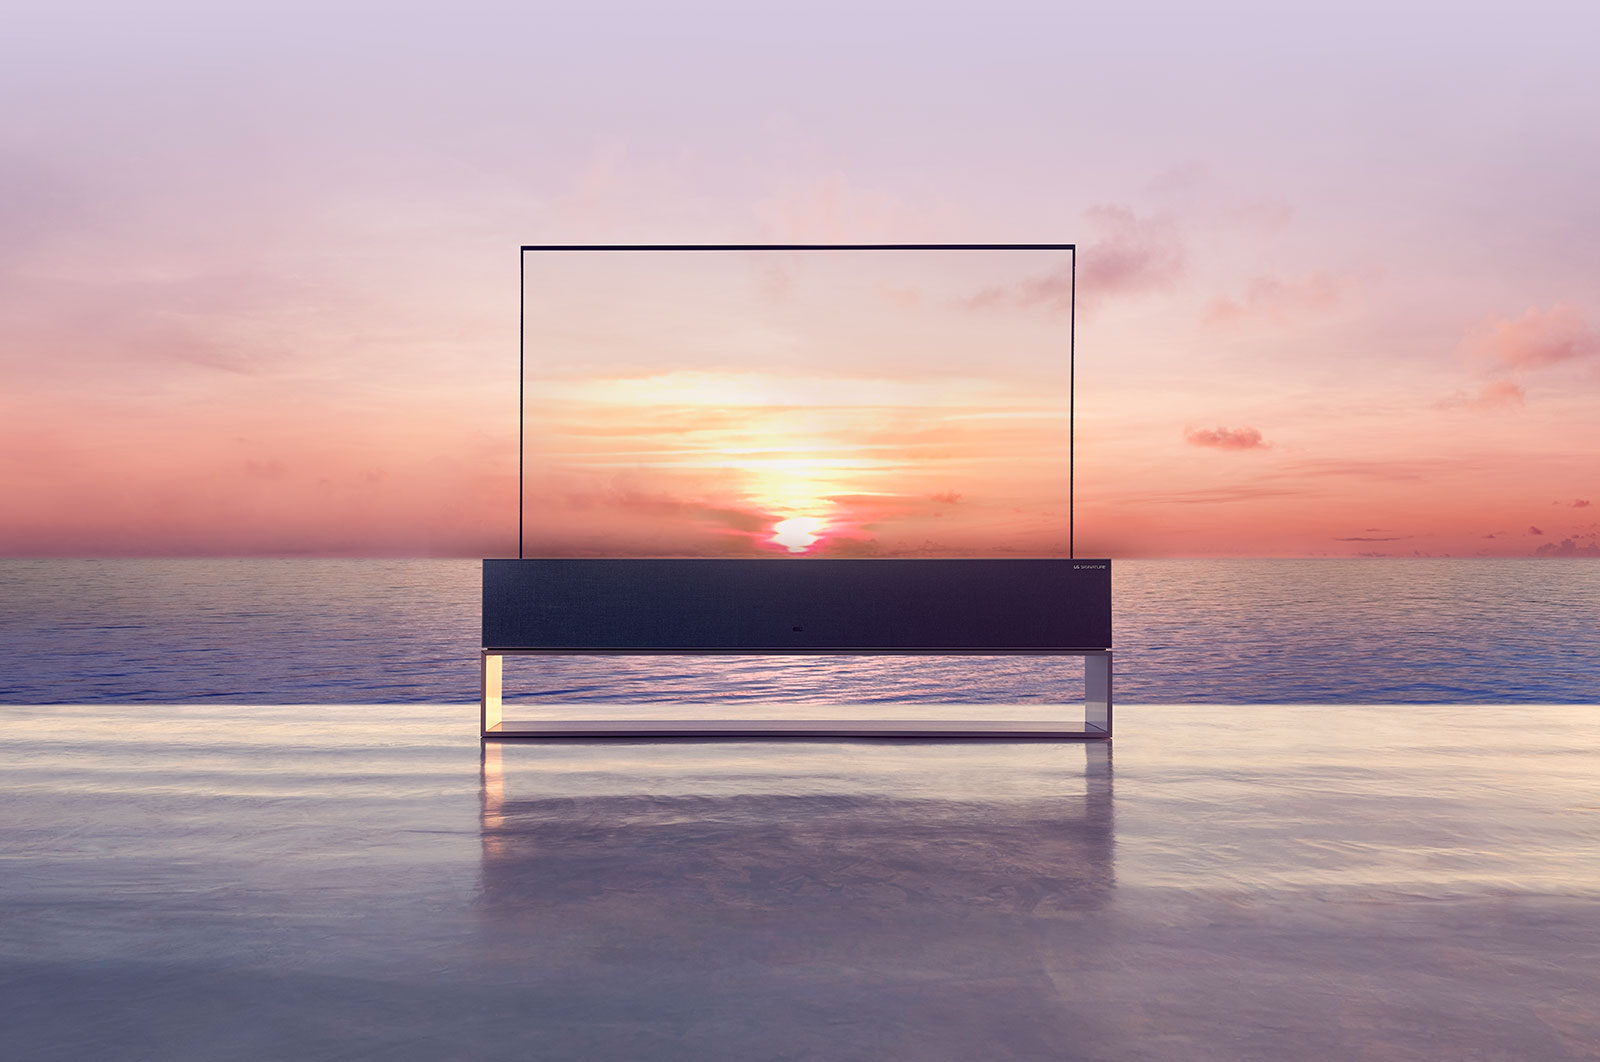 LG's rollable OLED TV is coming to the U.S with a $100.000 price tag